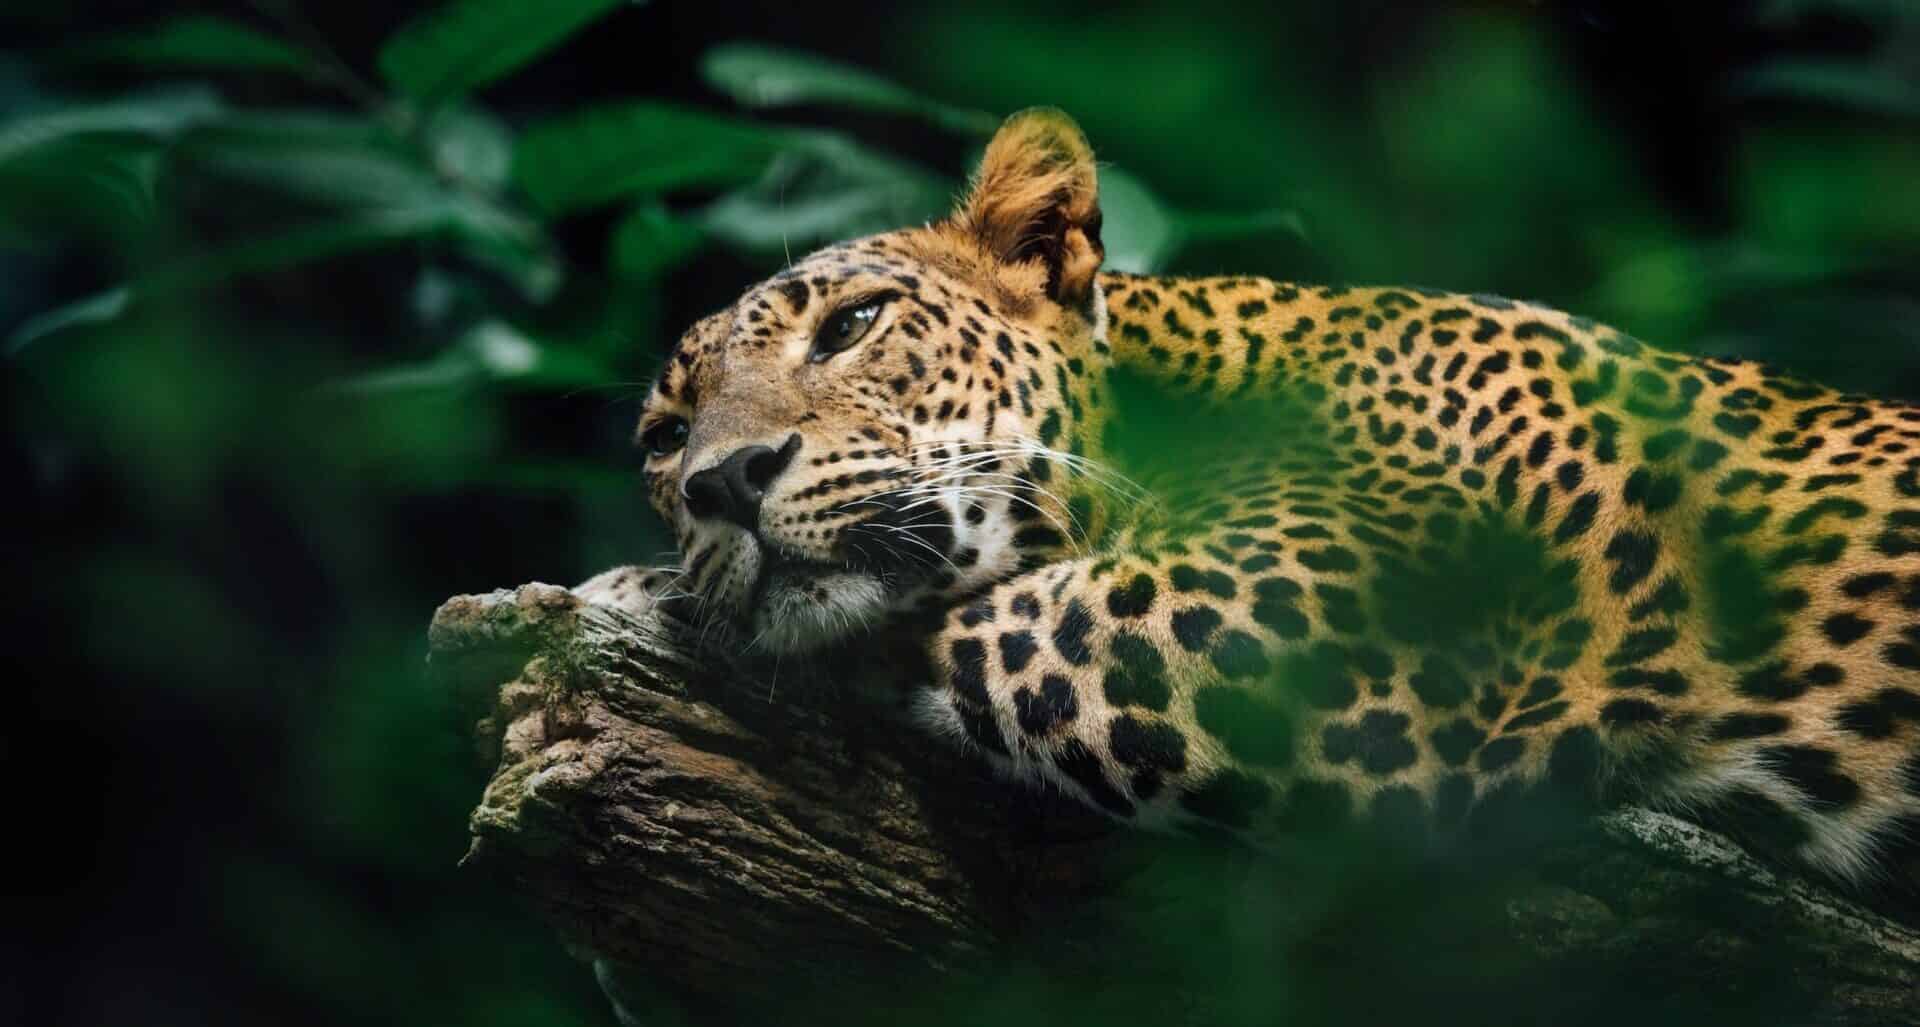 Jaguar laying on a log in the jungle in Belize